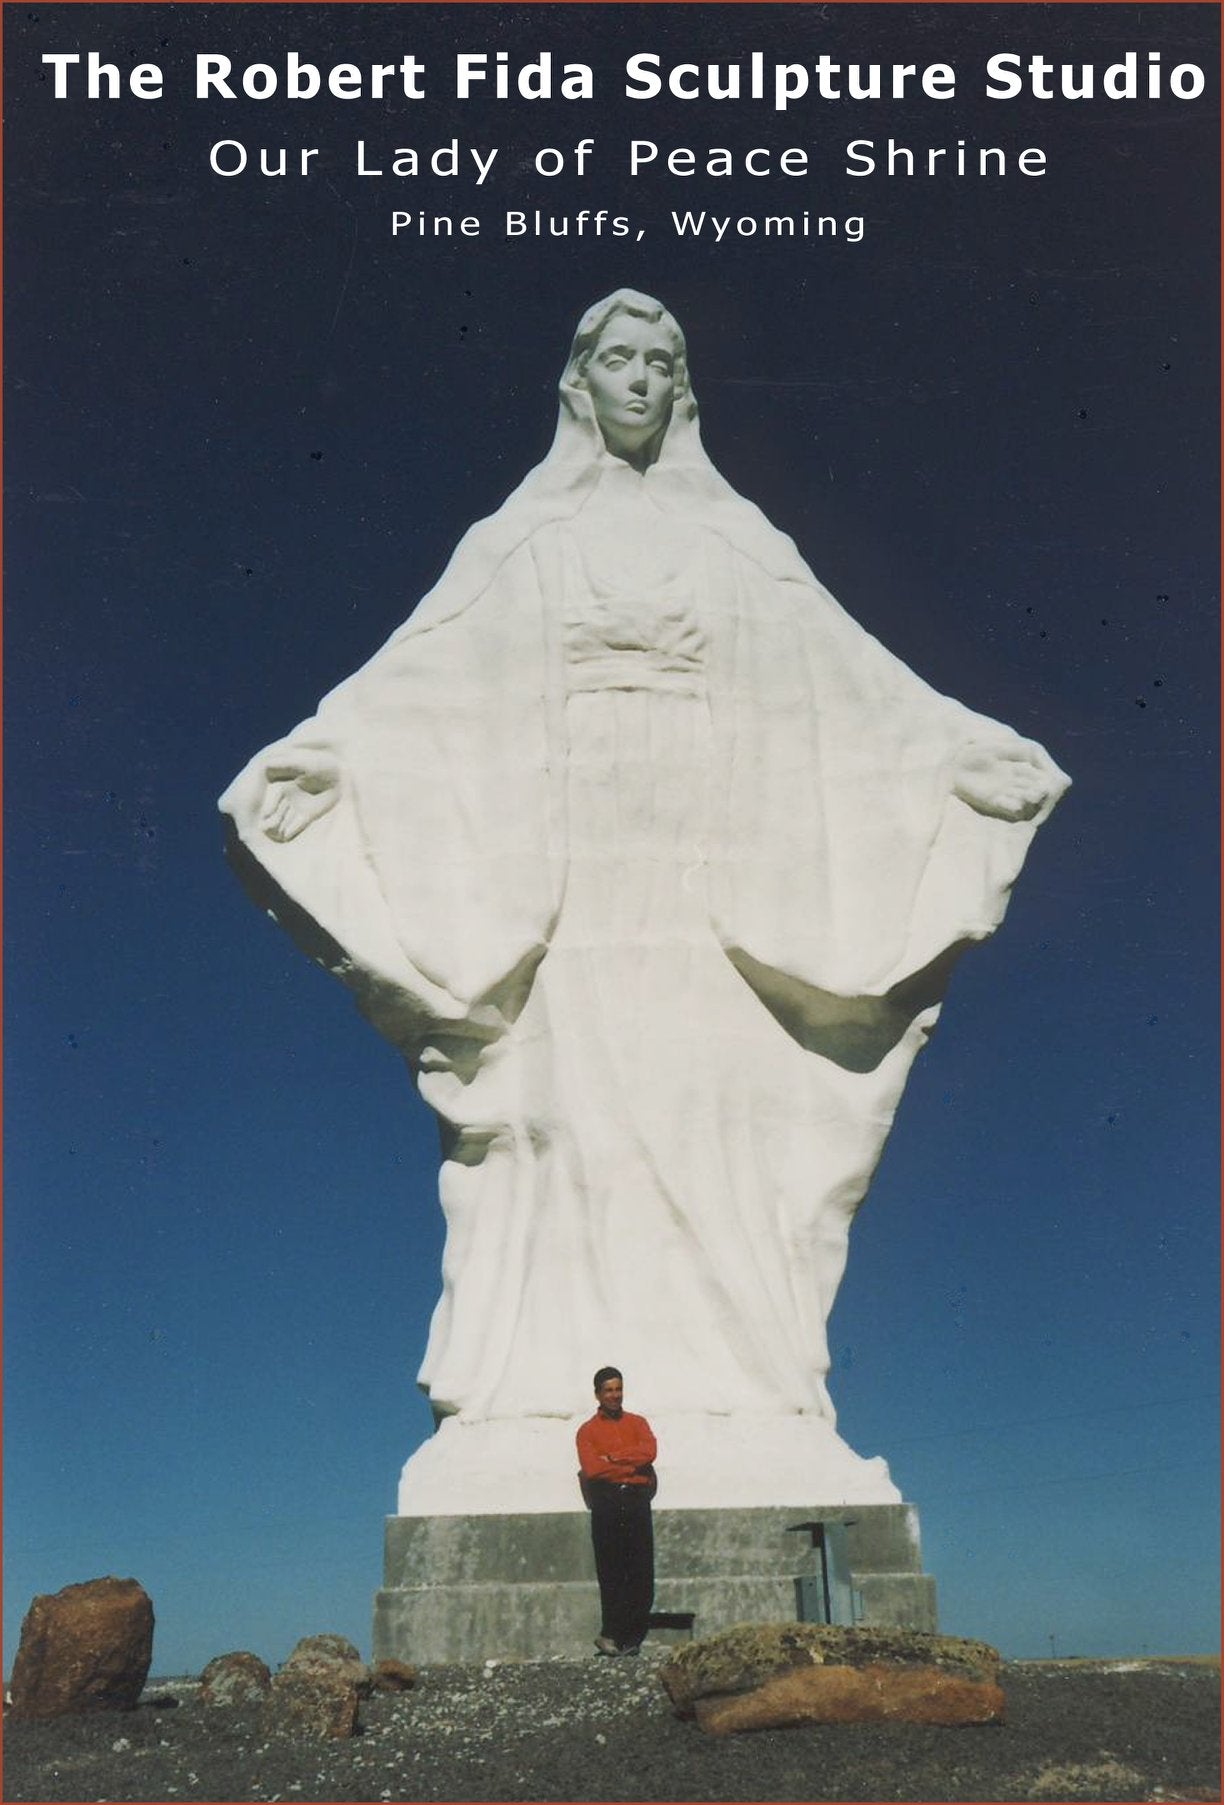 Our 'Lady of Peace' sculpture by, Robert Fida. Located in Pine Bluff, WY